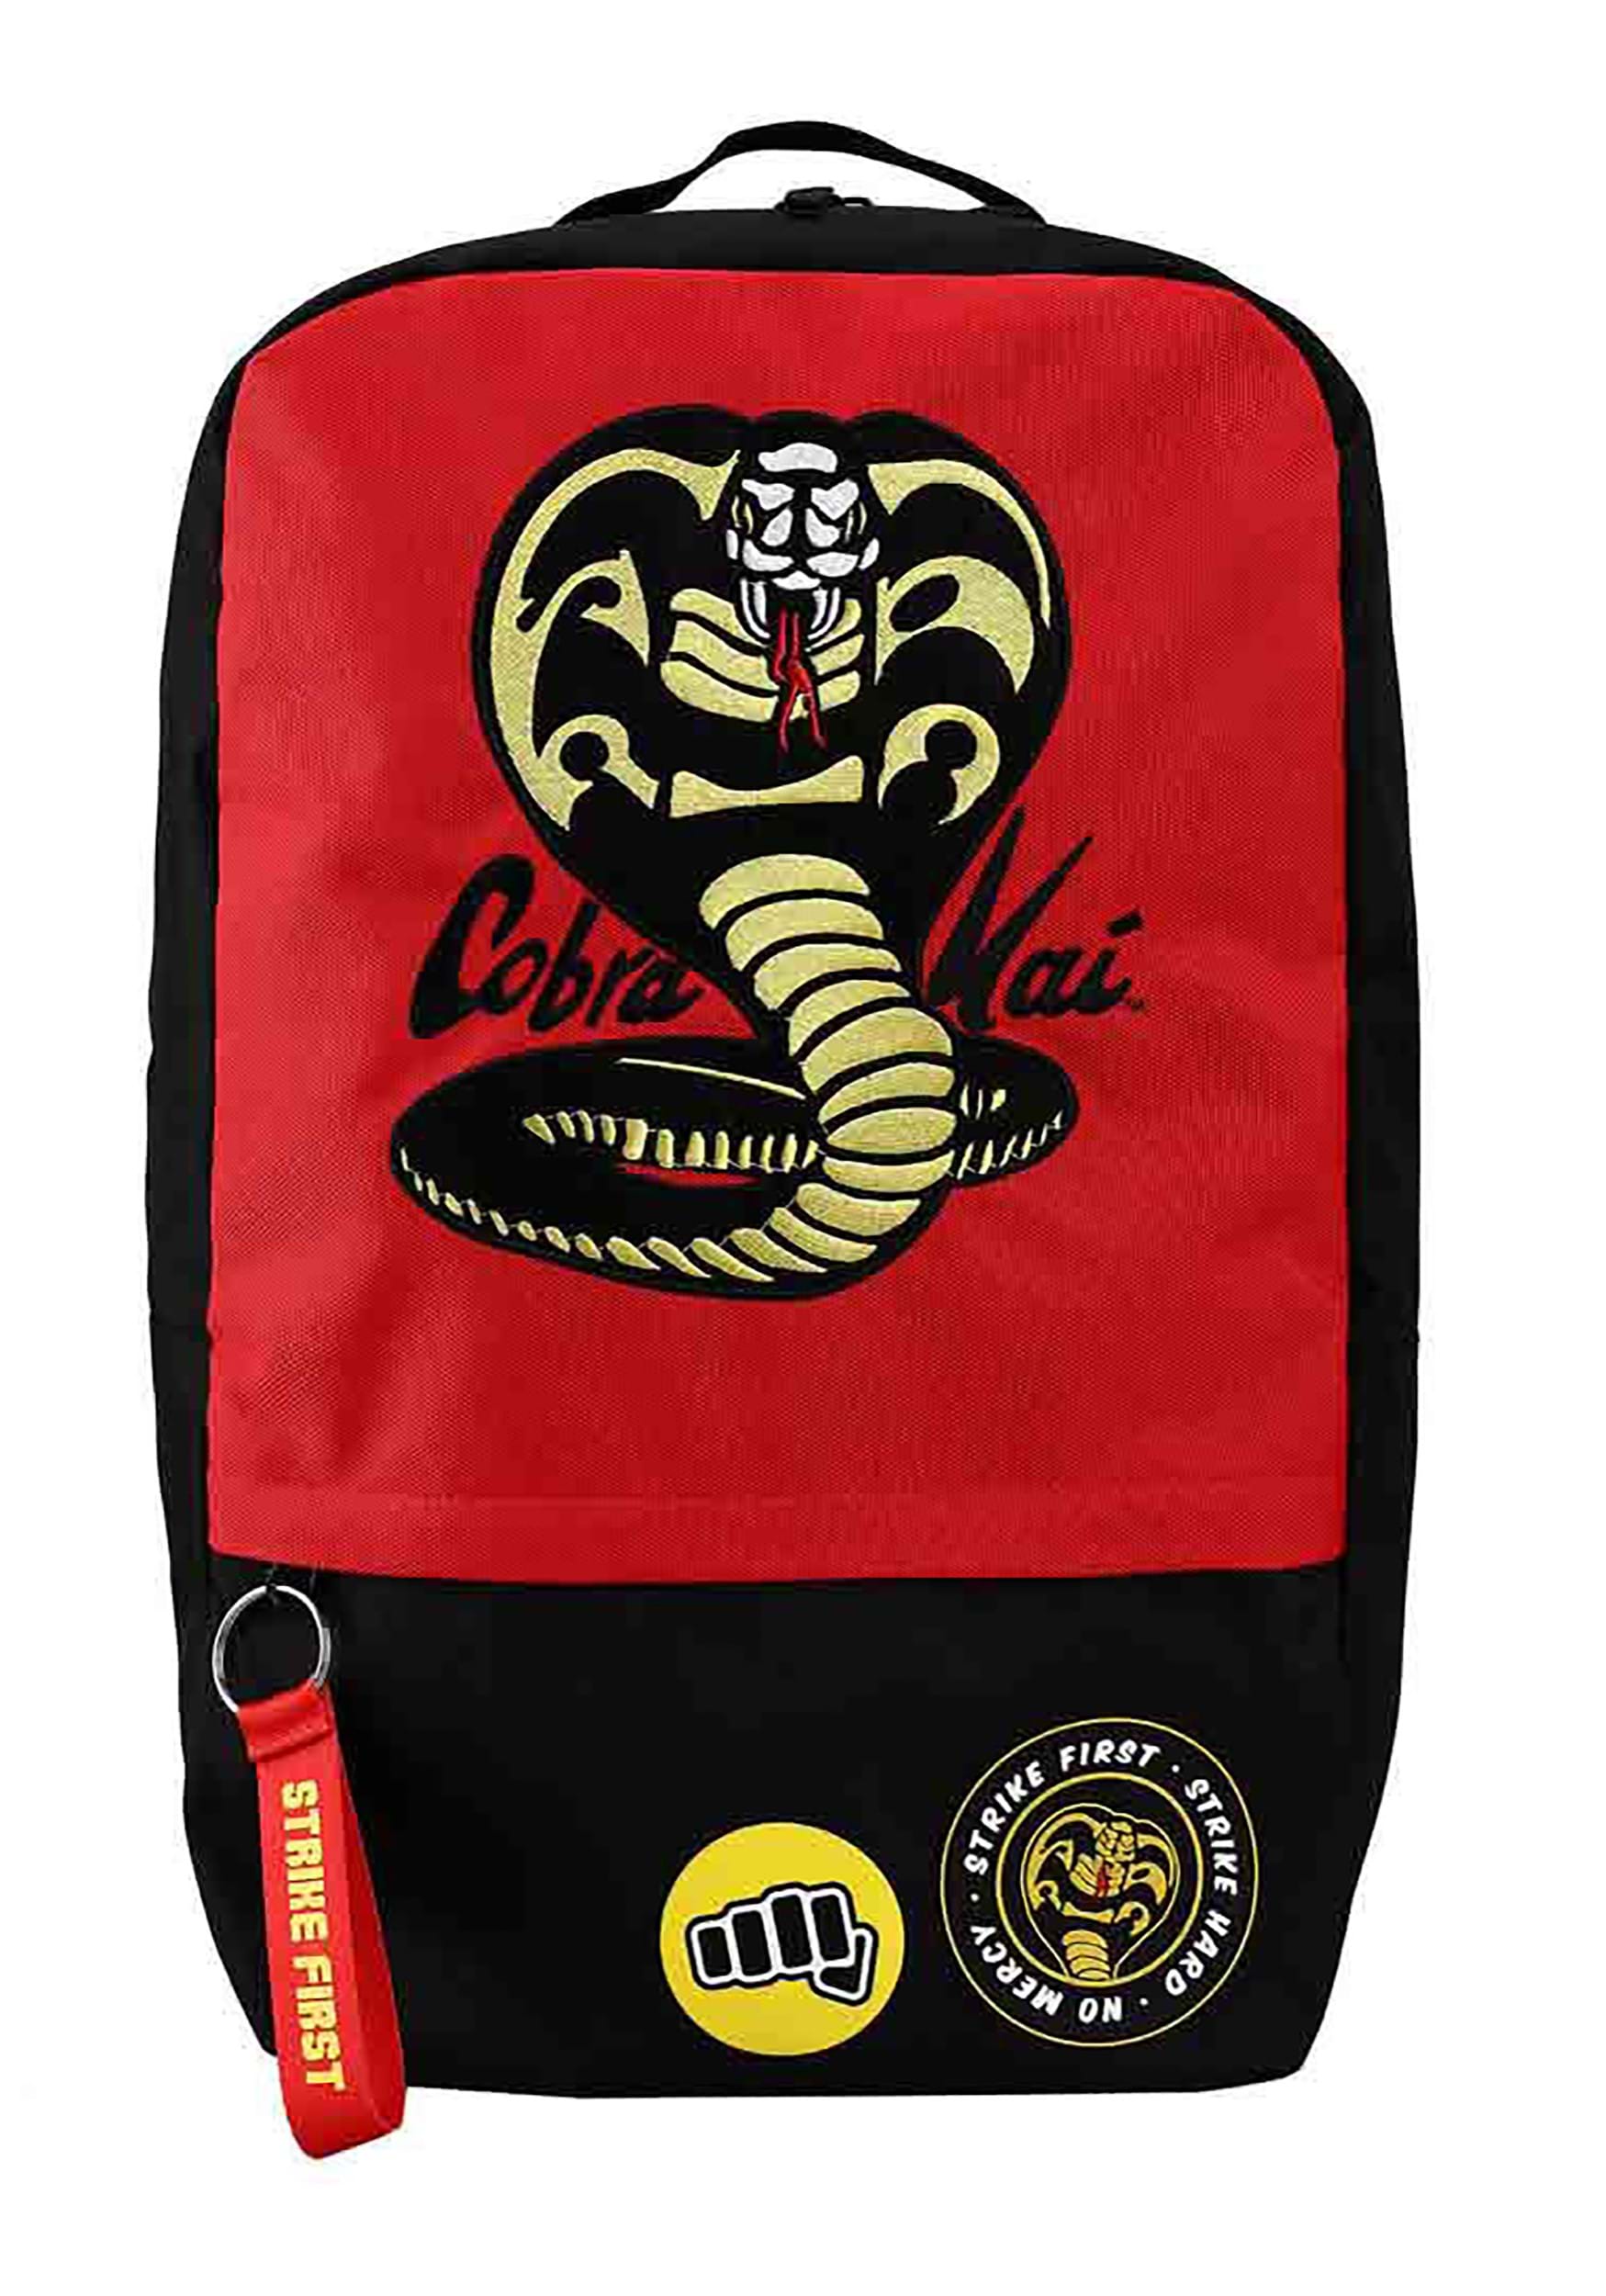 Cobra Kai Embroidered Patches Laptop Backpack